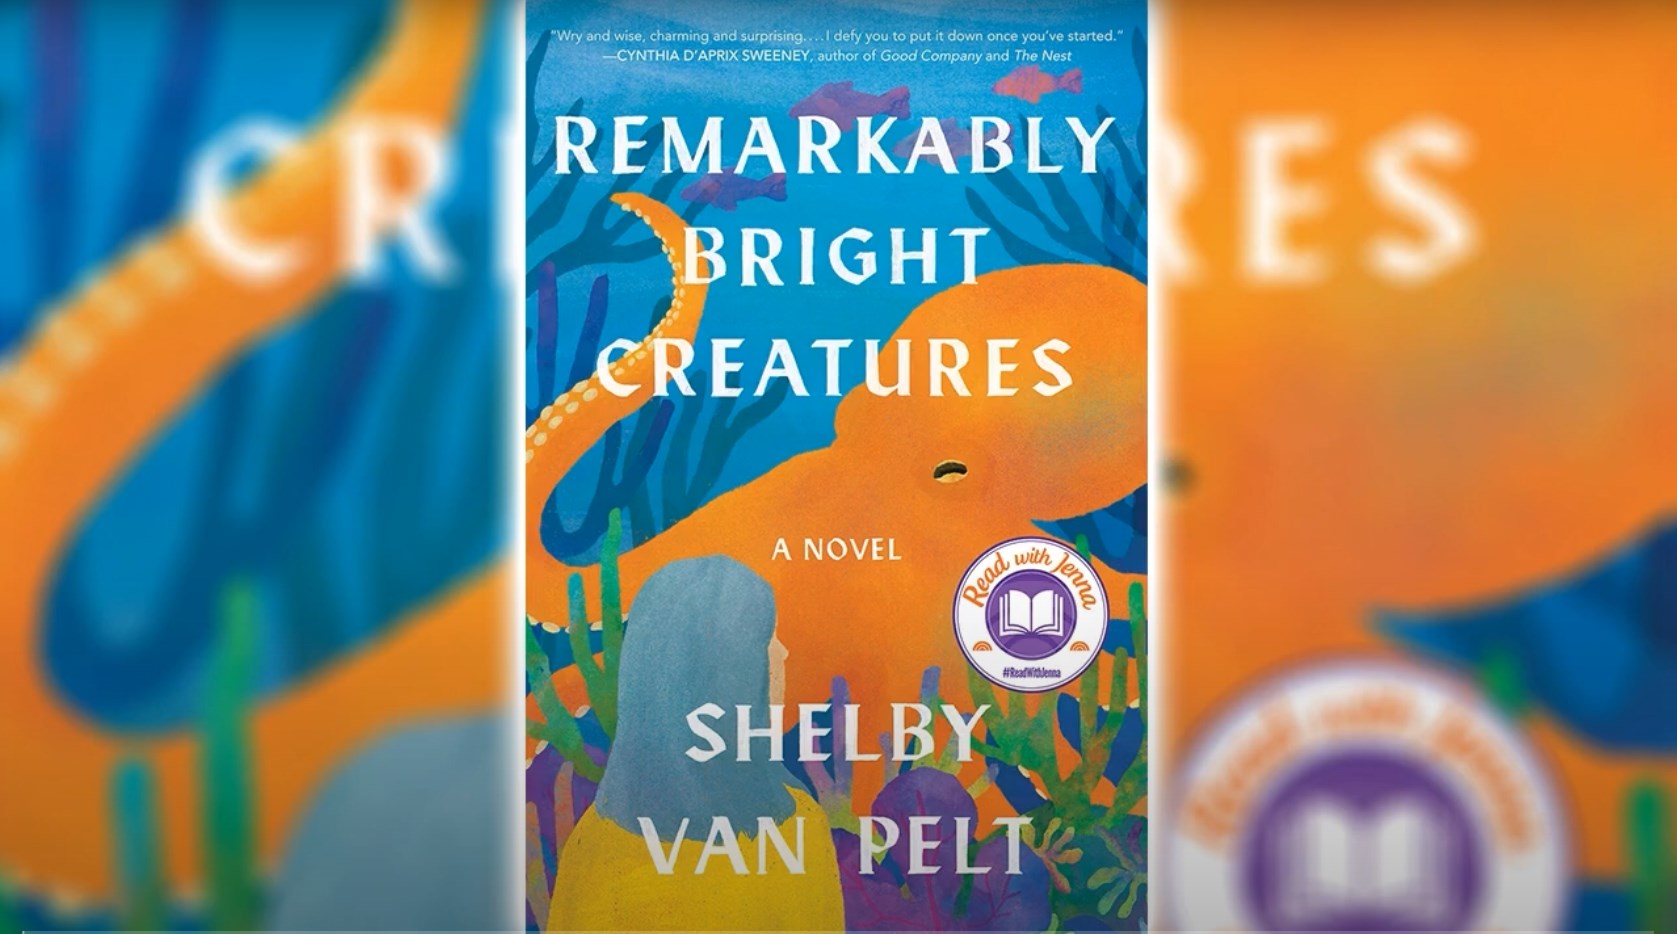 'Remarkably Bright Creatures', the book cover